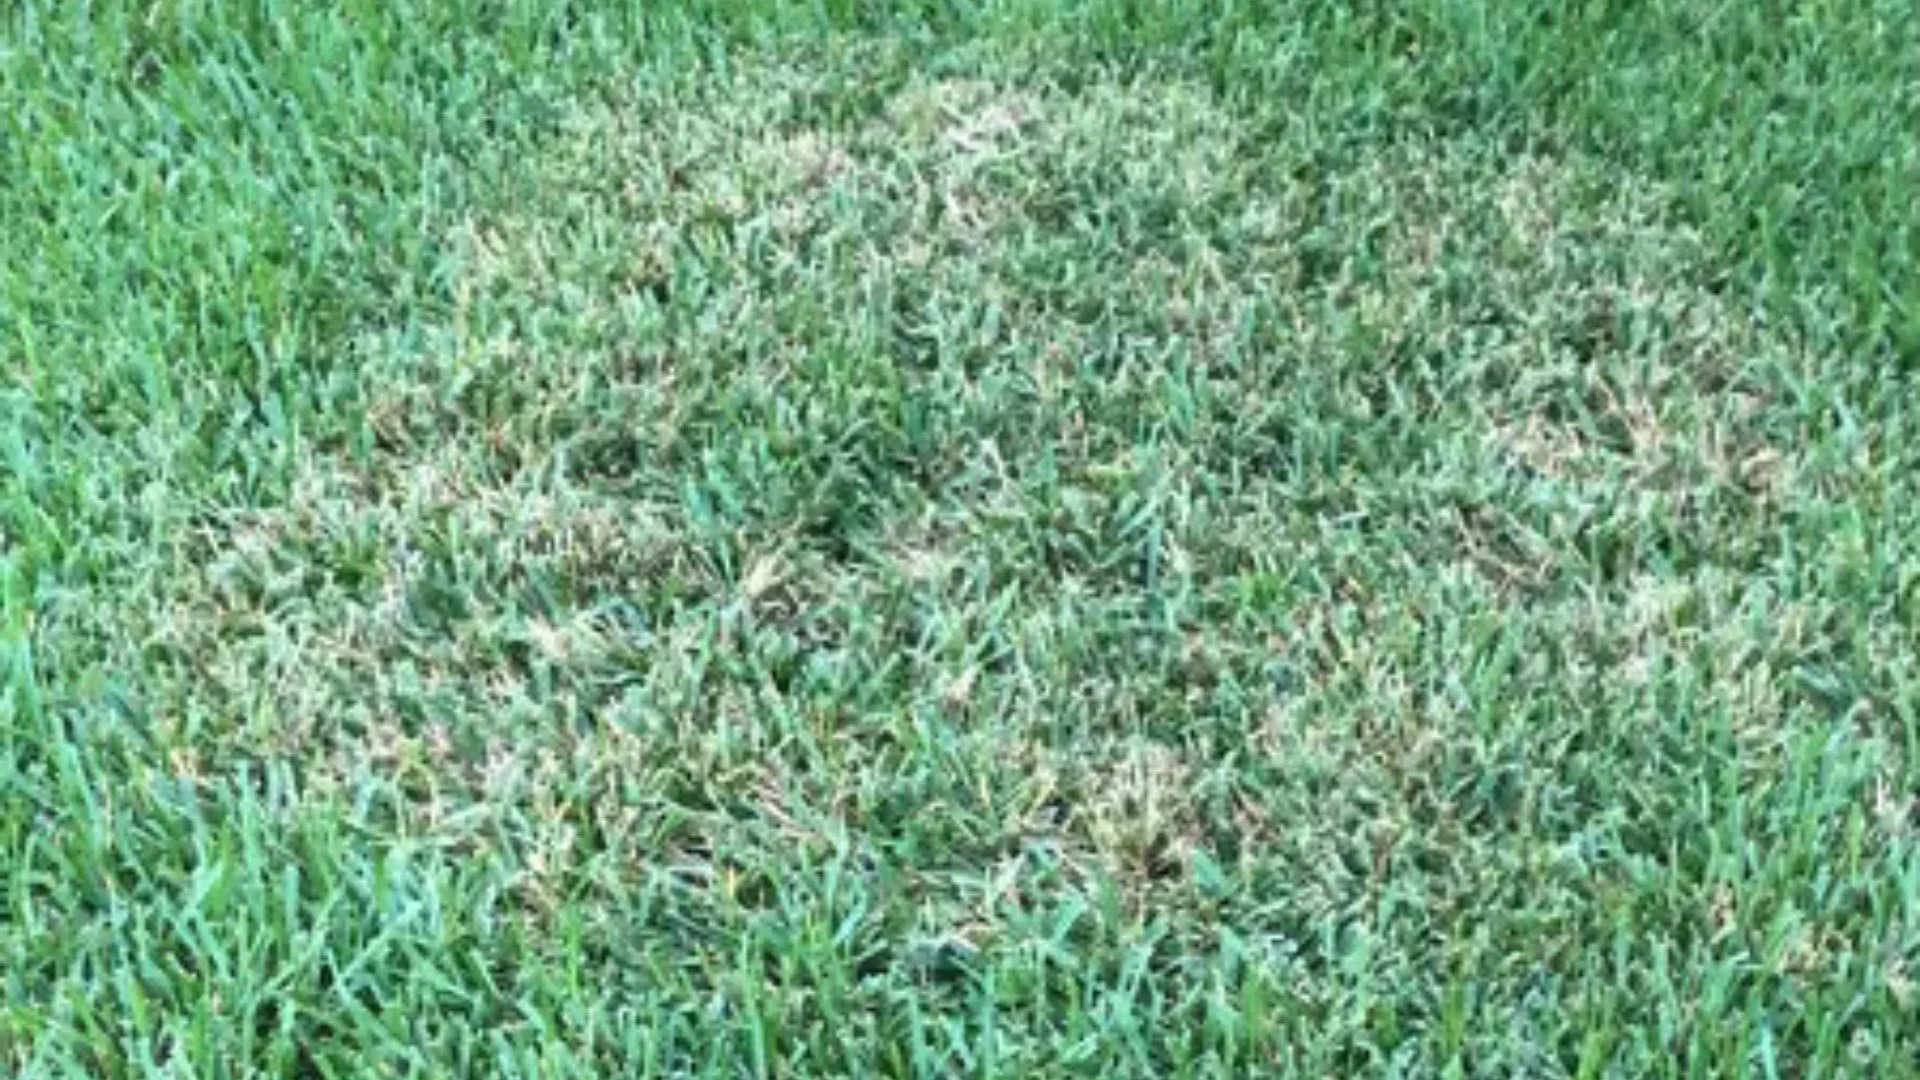 Brown Patch vs Drought - How to Tell Which Is Affecting Your Lawn